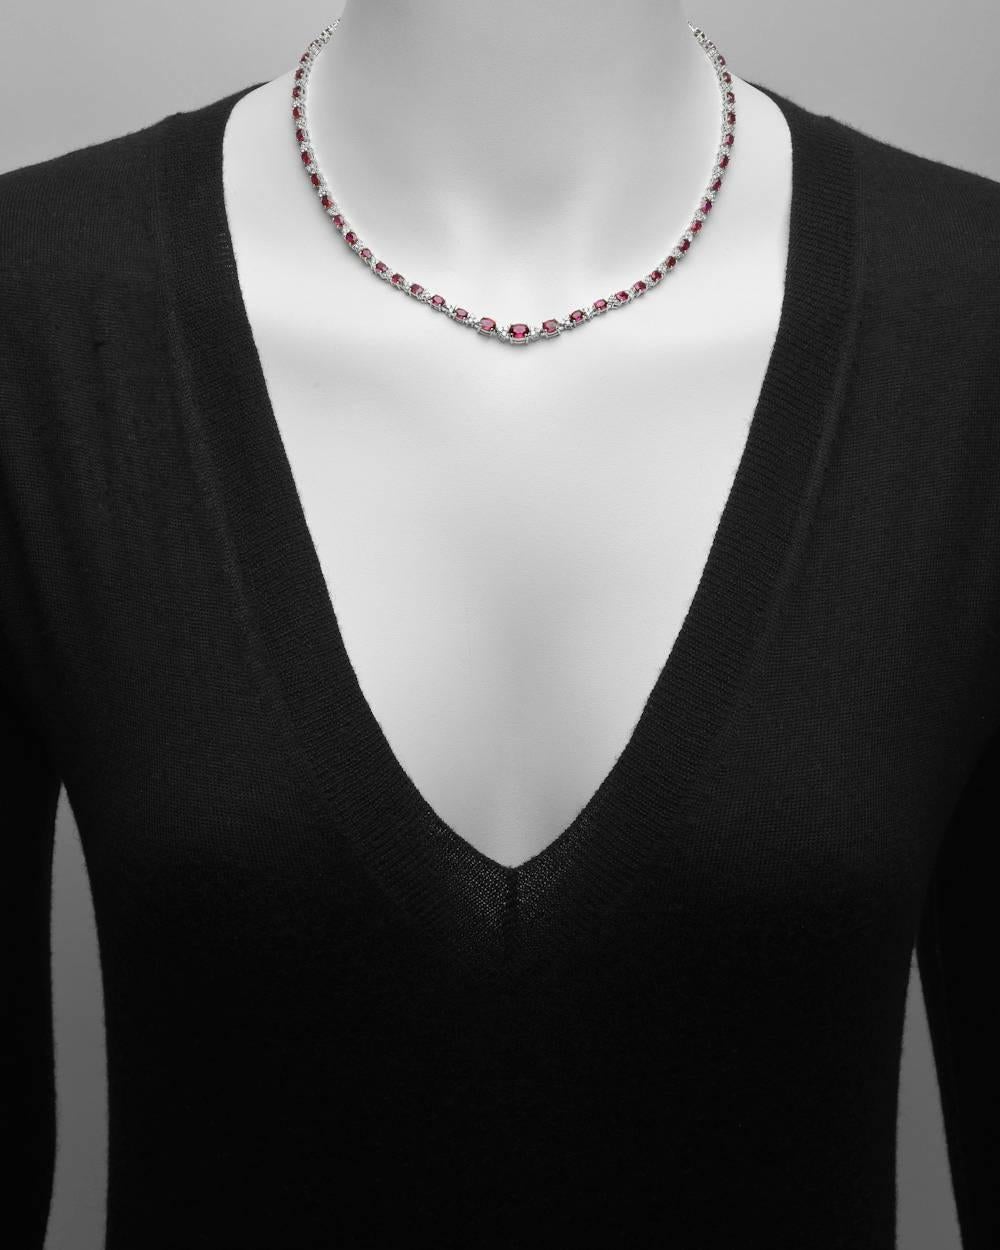 Graduated ruby and diamond line necklace, composed of oval-shaped rubies alternating with clusters of three small round diamonds, mounted in platinum. Rubies weighing approximately 13.00 total carats and diamonds weighing approximately 2.38 total